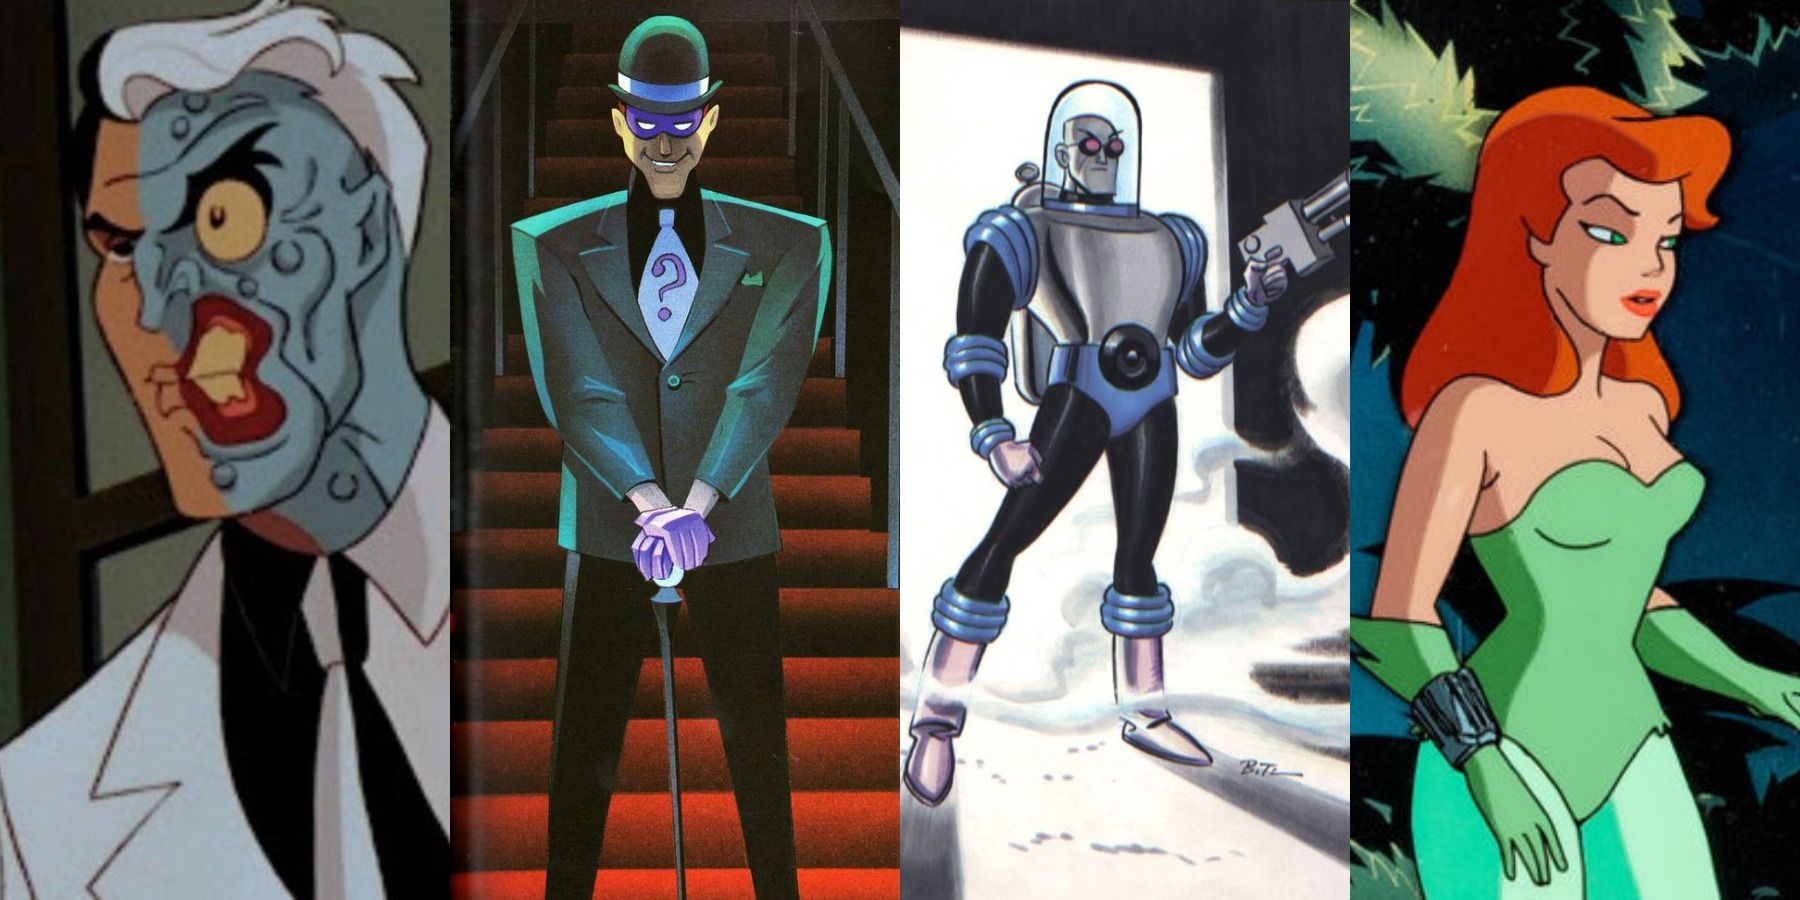 Split image of Two-Face, Riddler, Mr. Freeze, and Poison Ivy from Batman the Animated Series.